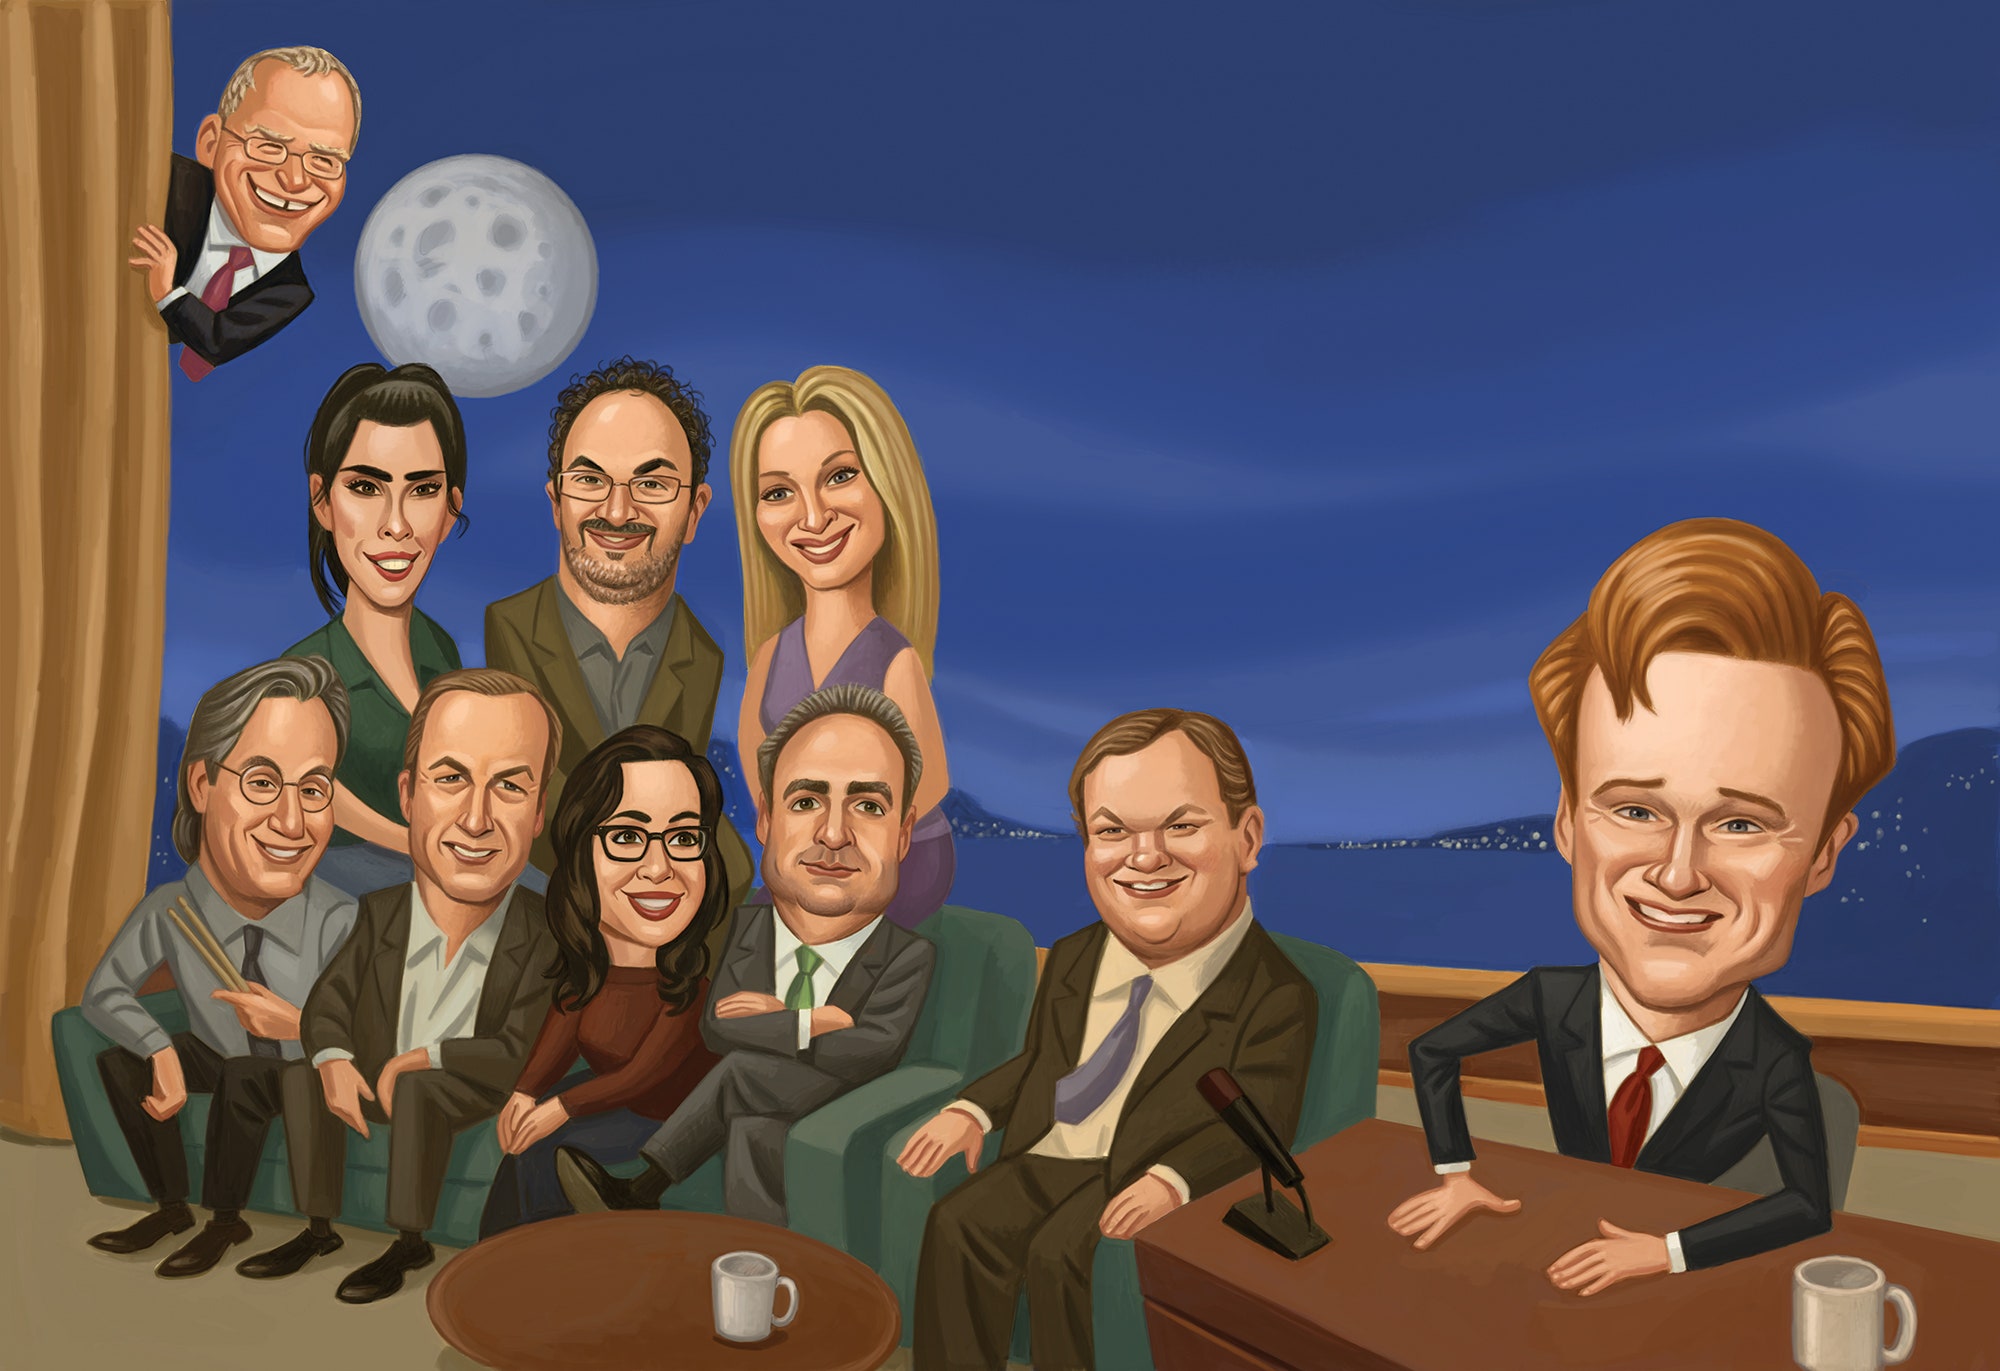 Illustration of Conan O'Brien and guests.